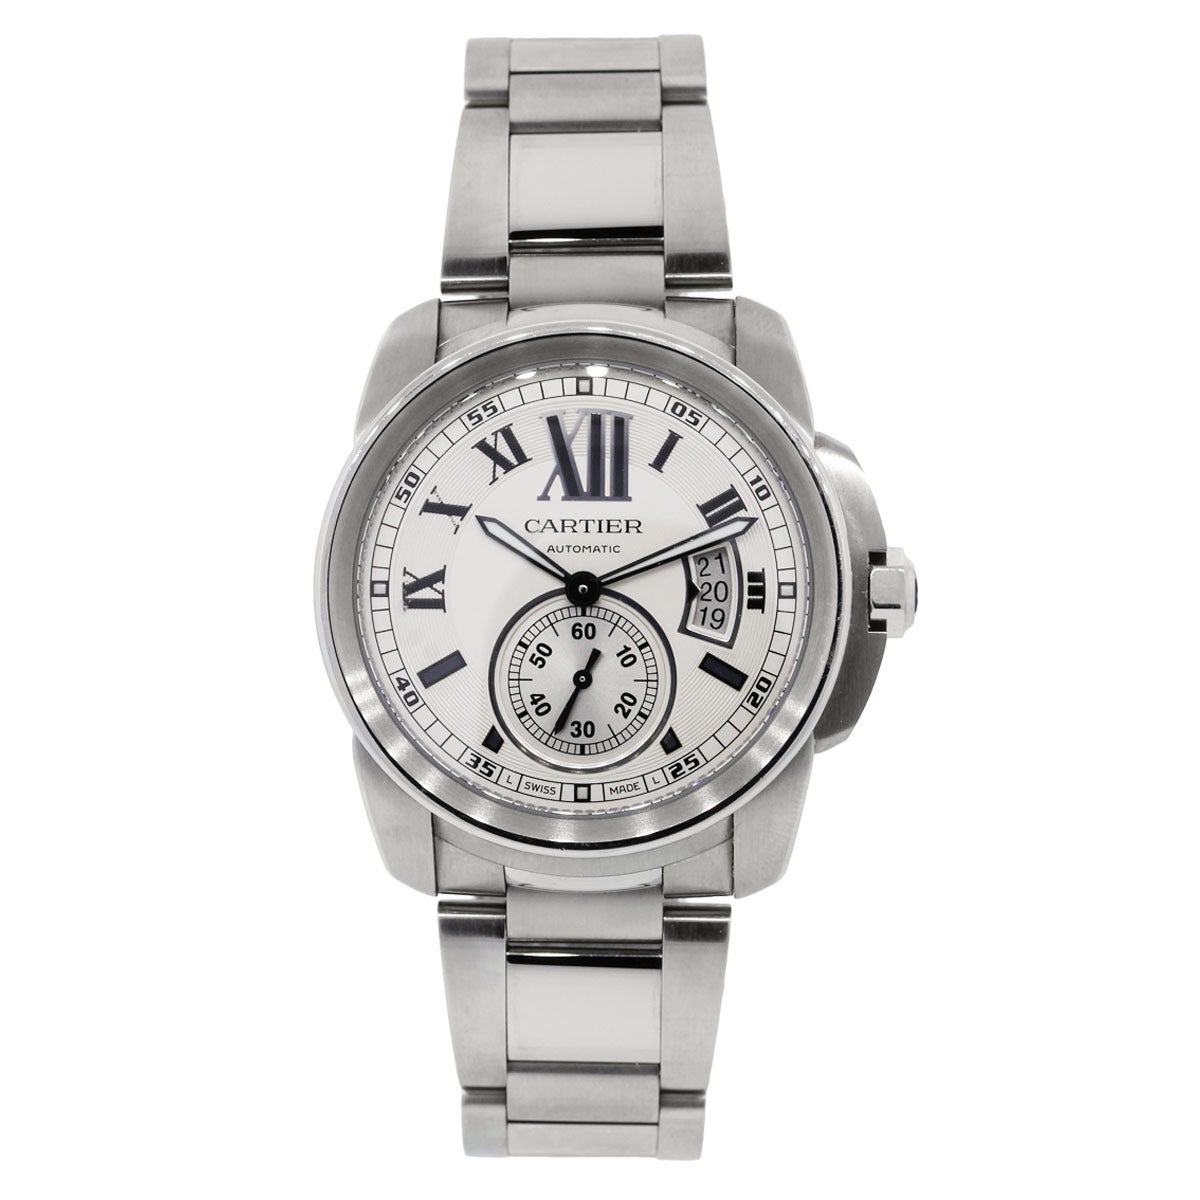 Cartier
Model: Calibre
Reference: 3389
Movement: Automatic
Case Measurement: 42mm
Case Material: Stainless Steel
Dial: Silvered dial
Bezel: Fixed smooth bezel
Bracelet: Stainless steel
Crystal: Scratch Resistant Sapphire
Clasp: Safety